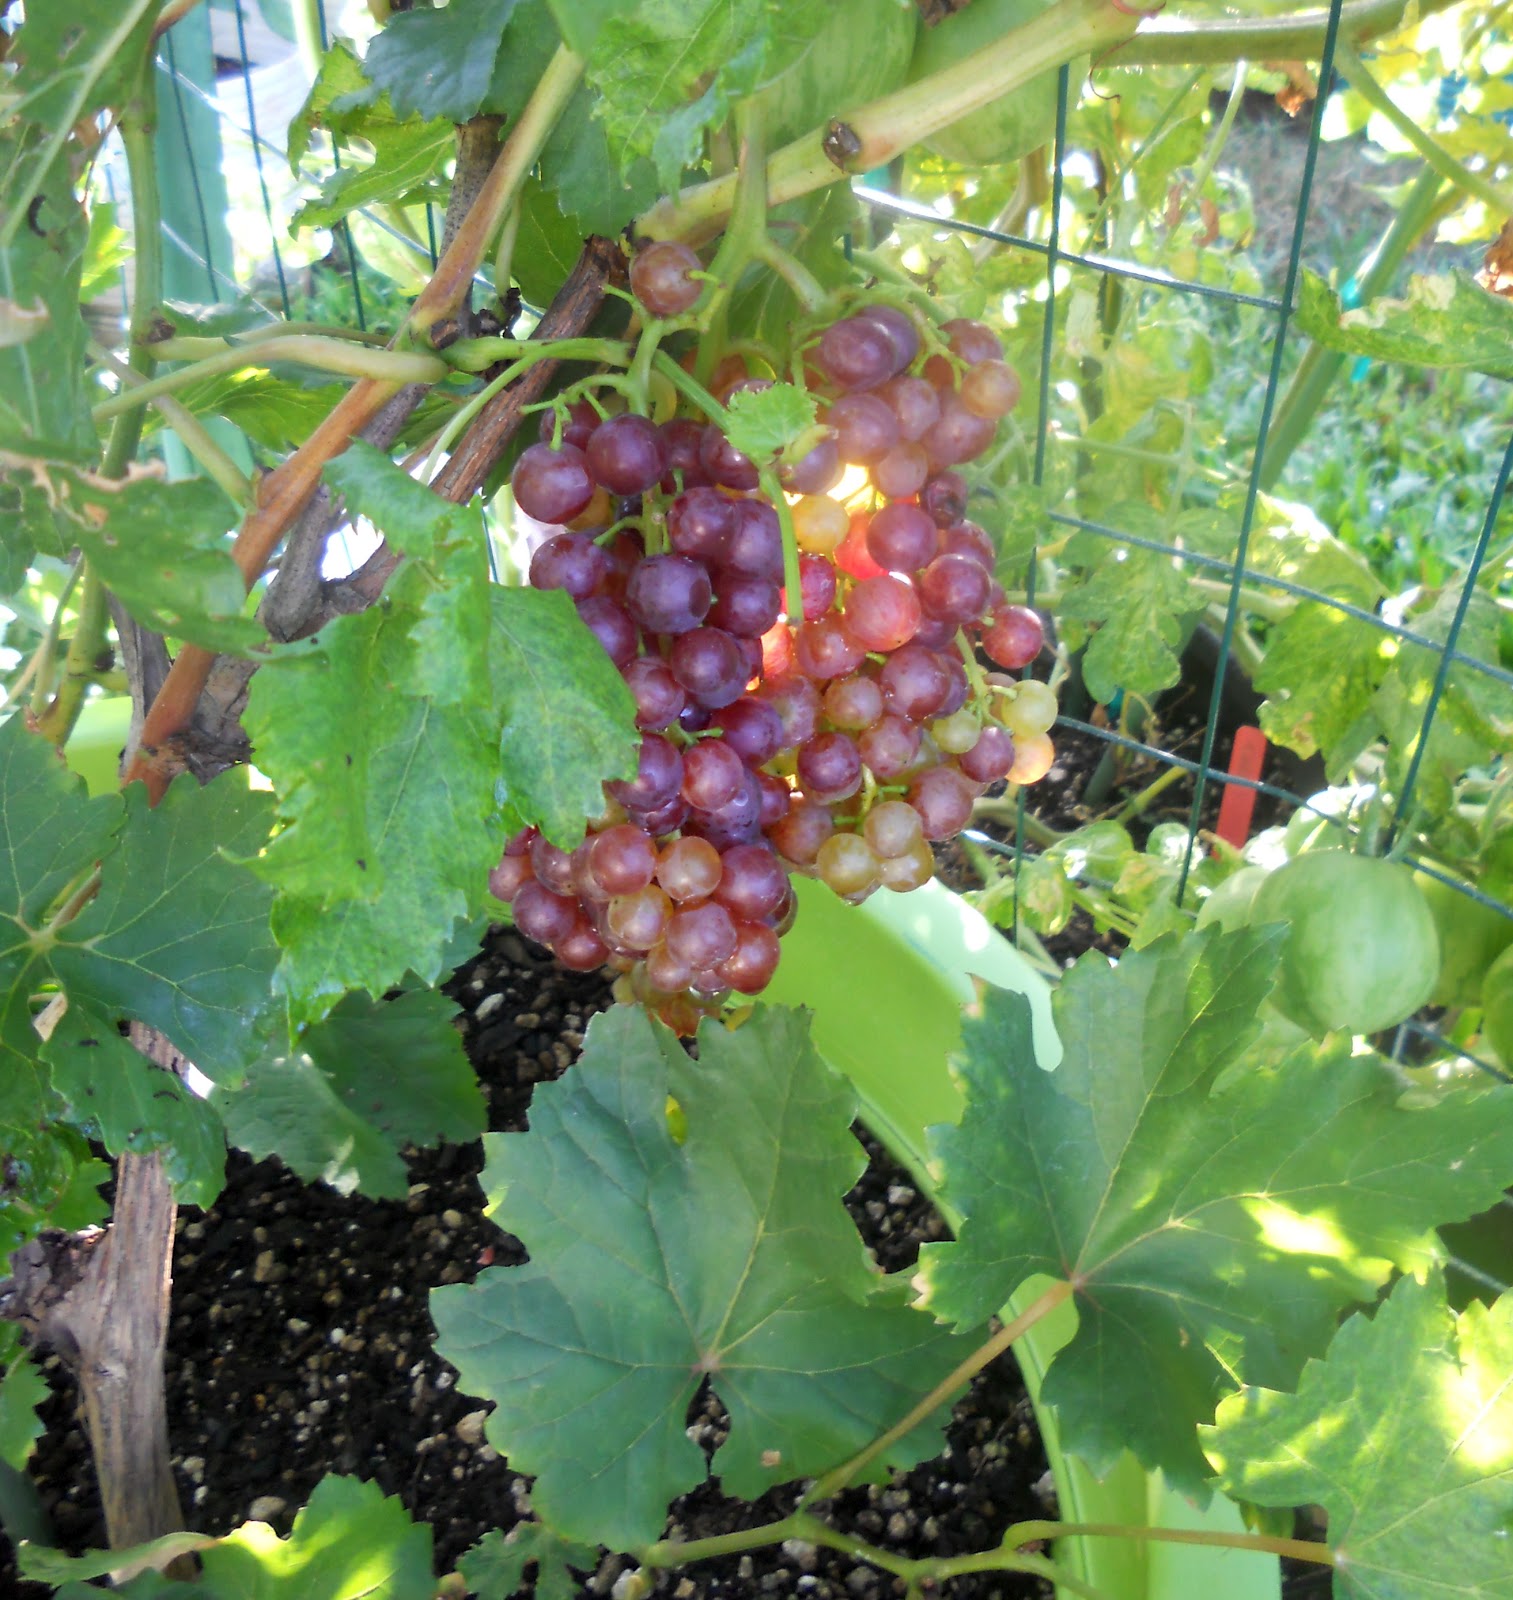 hd images of grapes tree